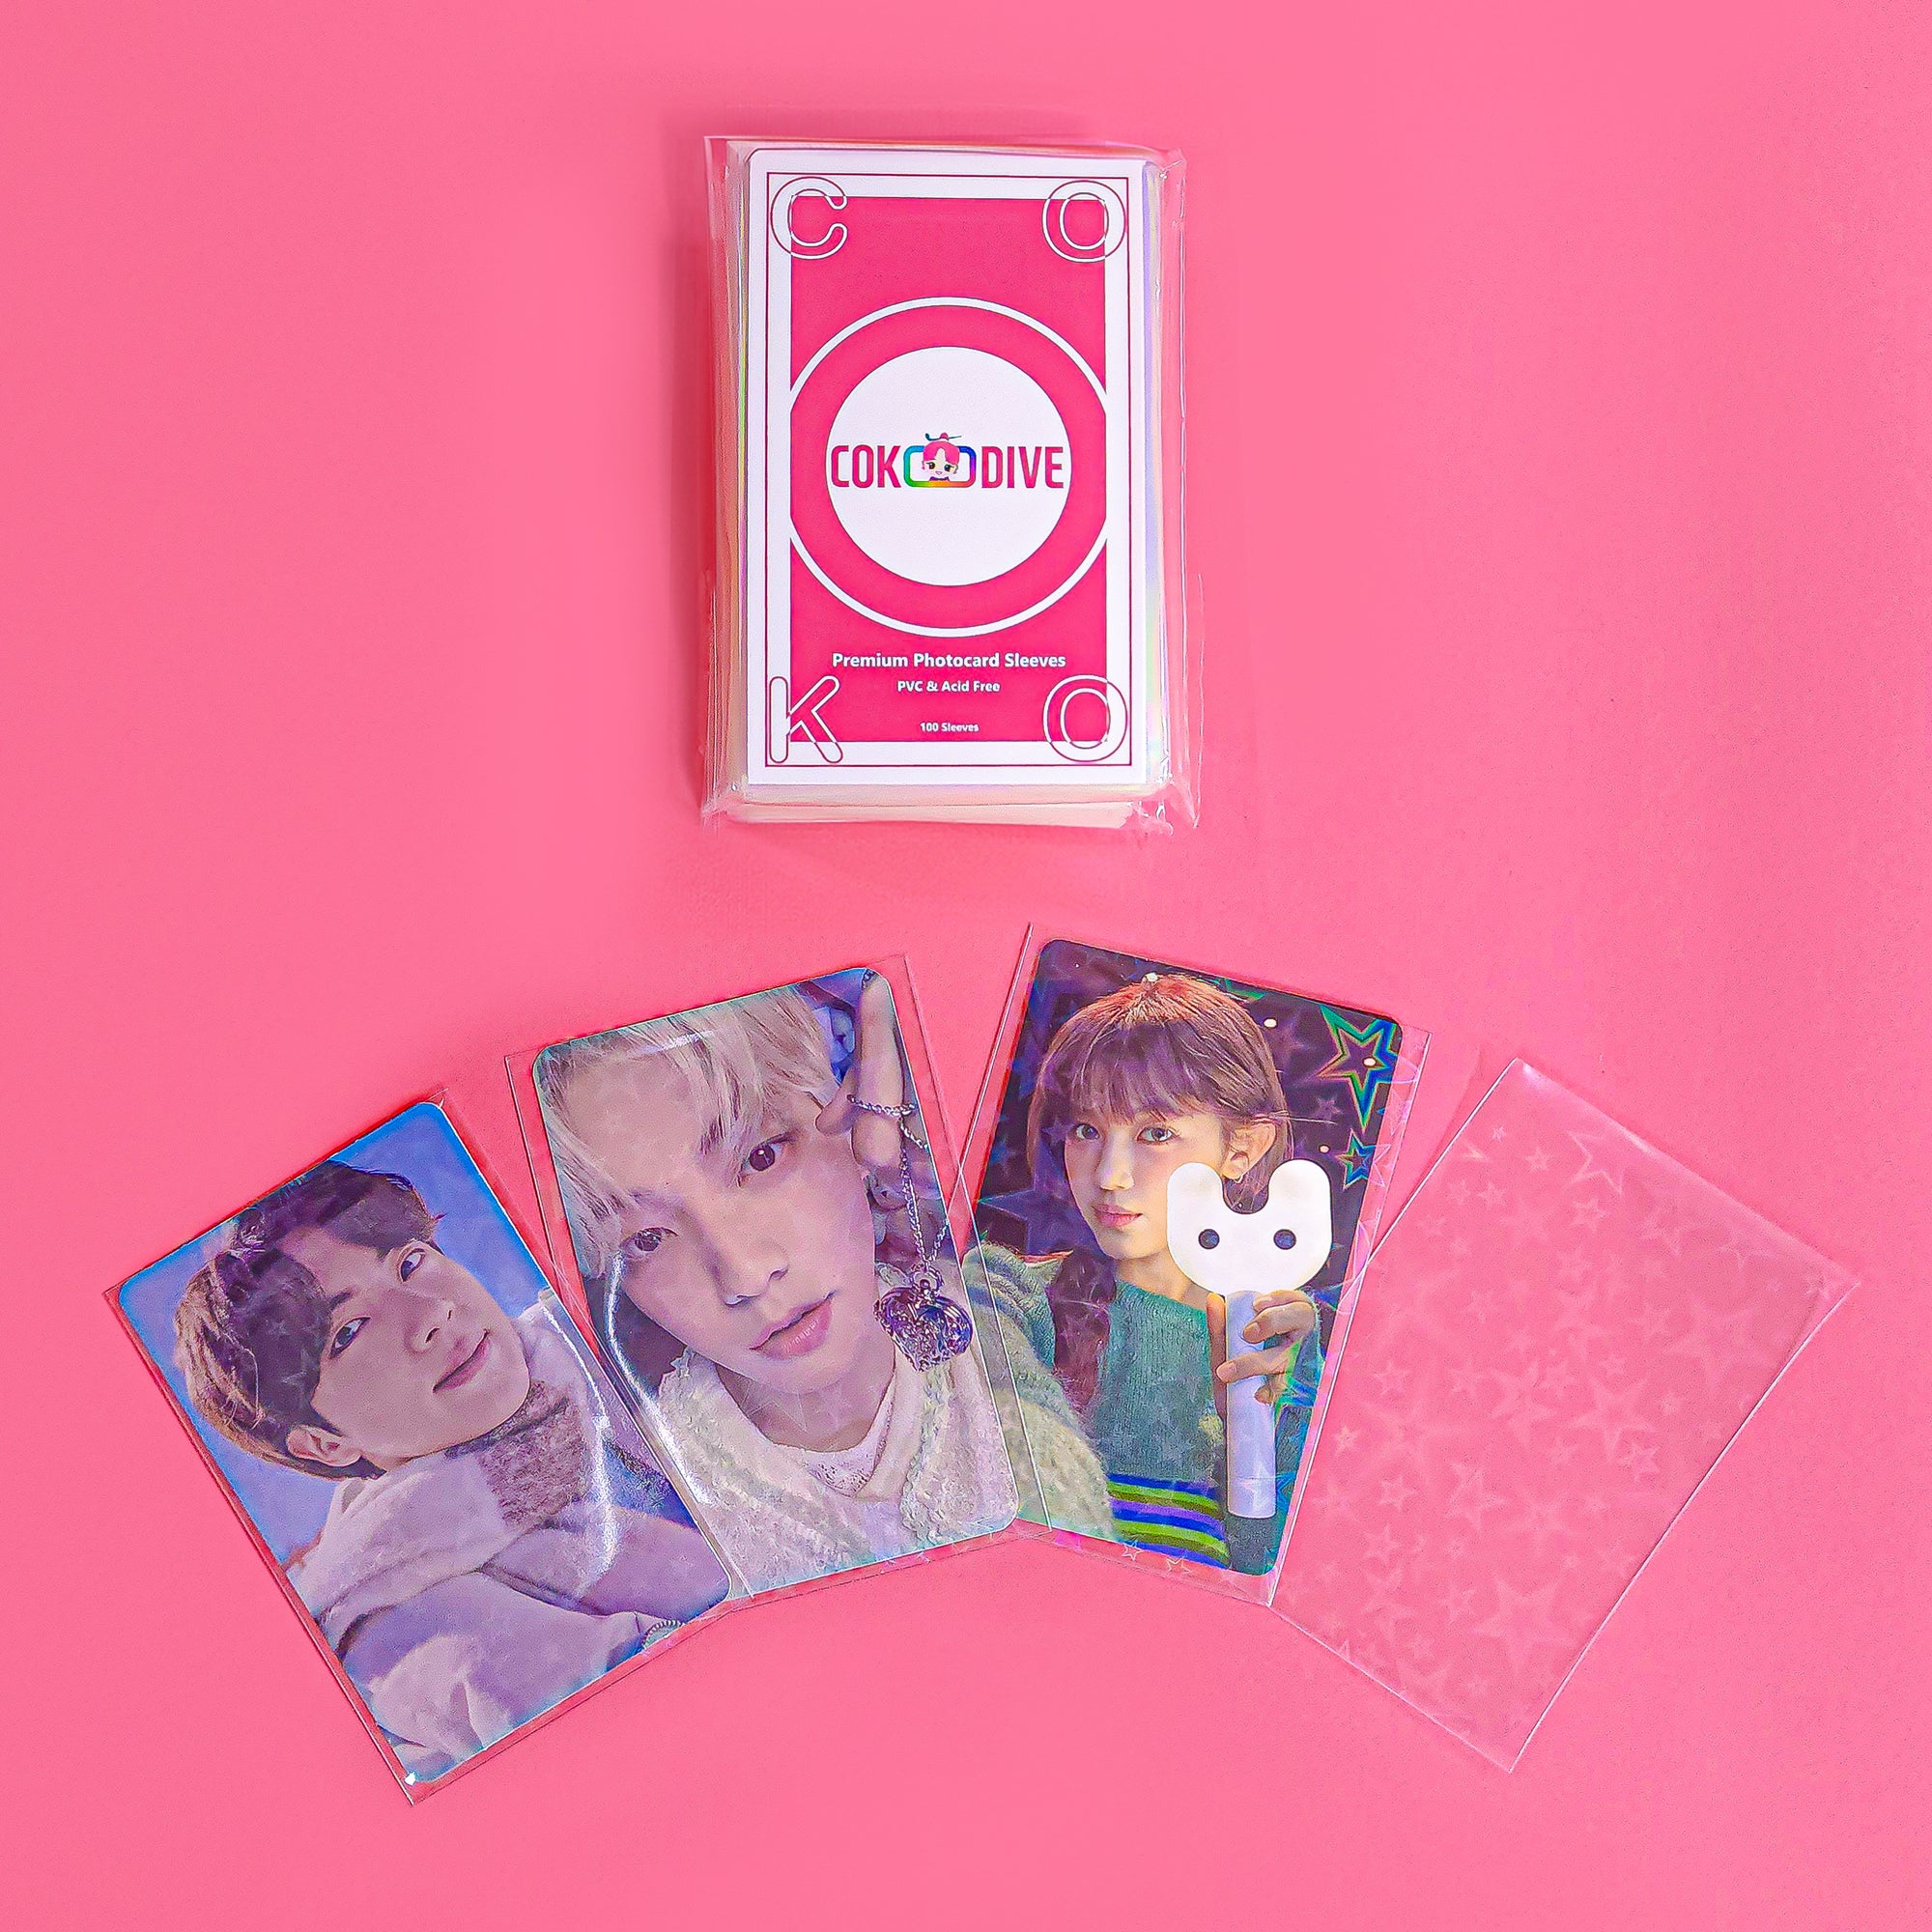 BIG STAR PHOTOCARD SLEEVES FOR K-POP FANS - COKODIVE